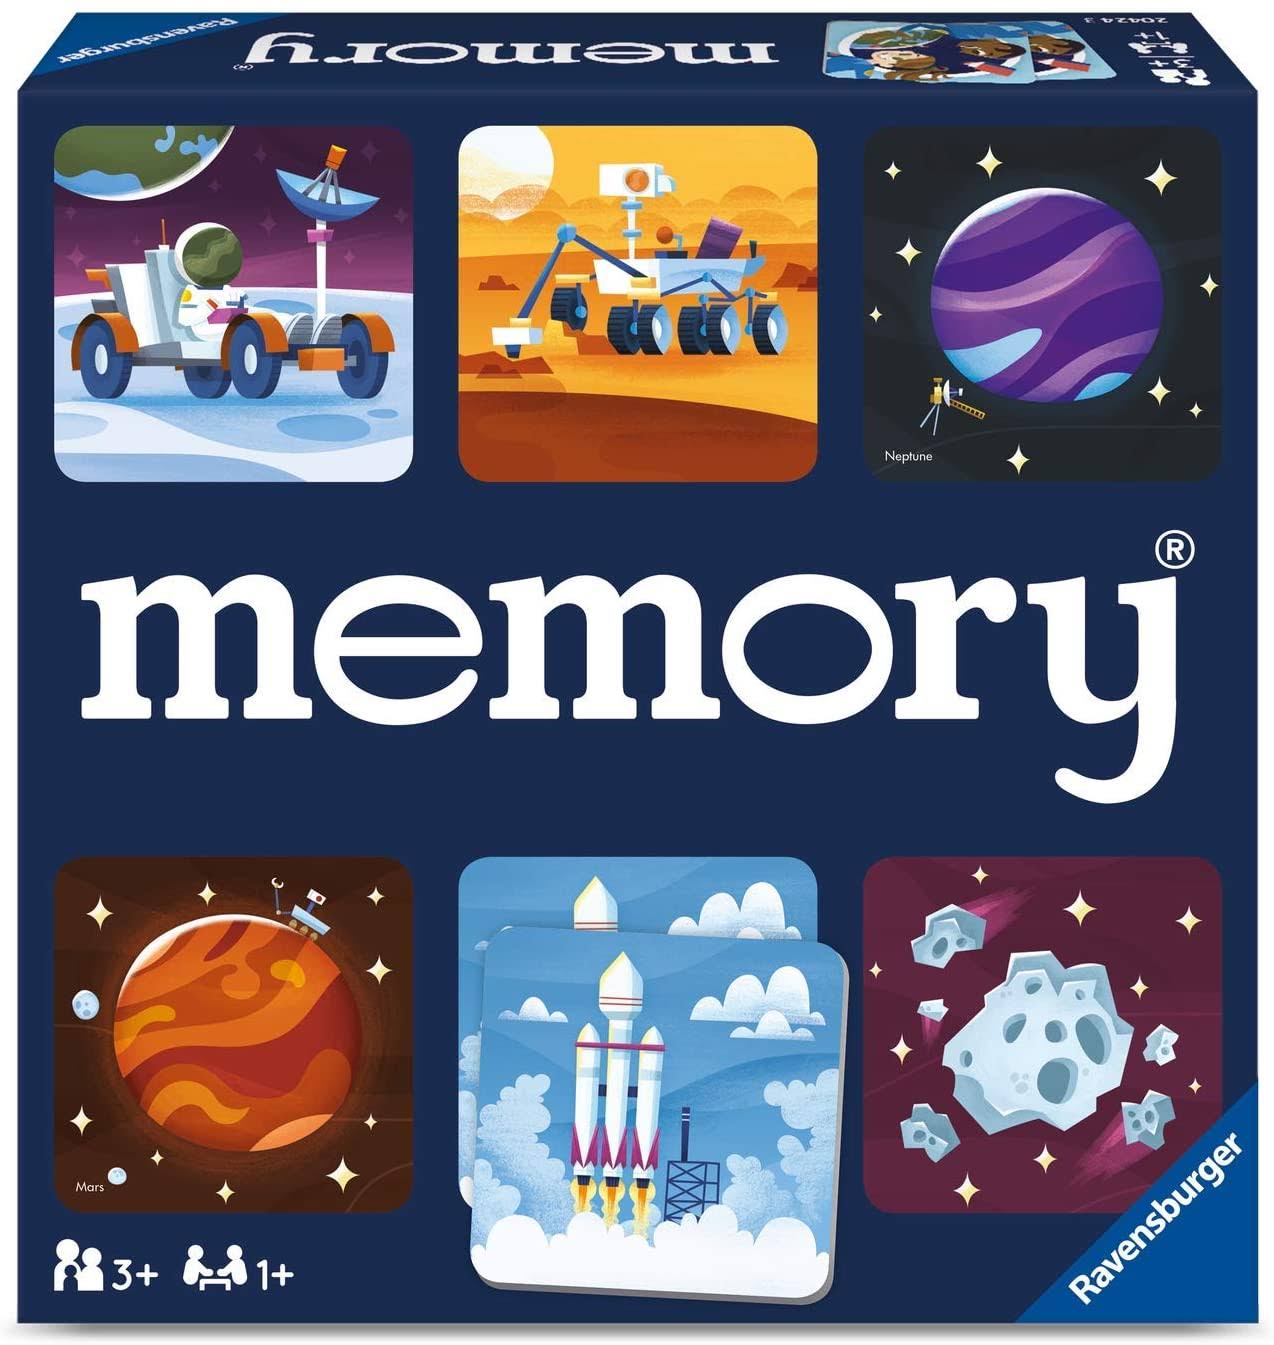 Ravensburger Space Memory Game for Boys & Girls Age 3 & Up! - A Fun and Fast Cosmic Matching Game (20424)